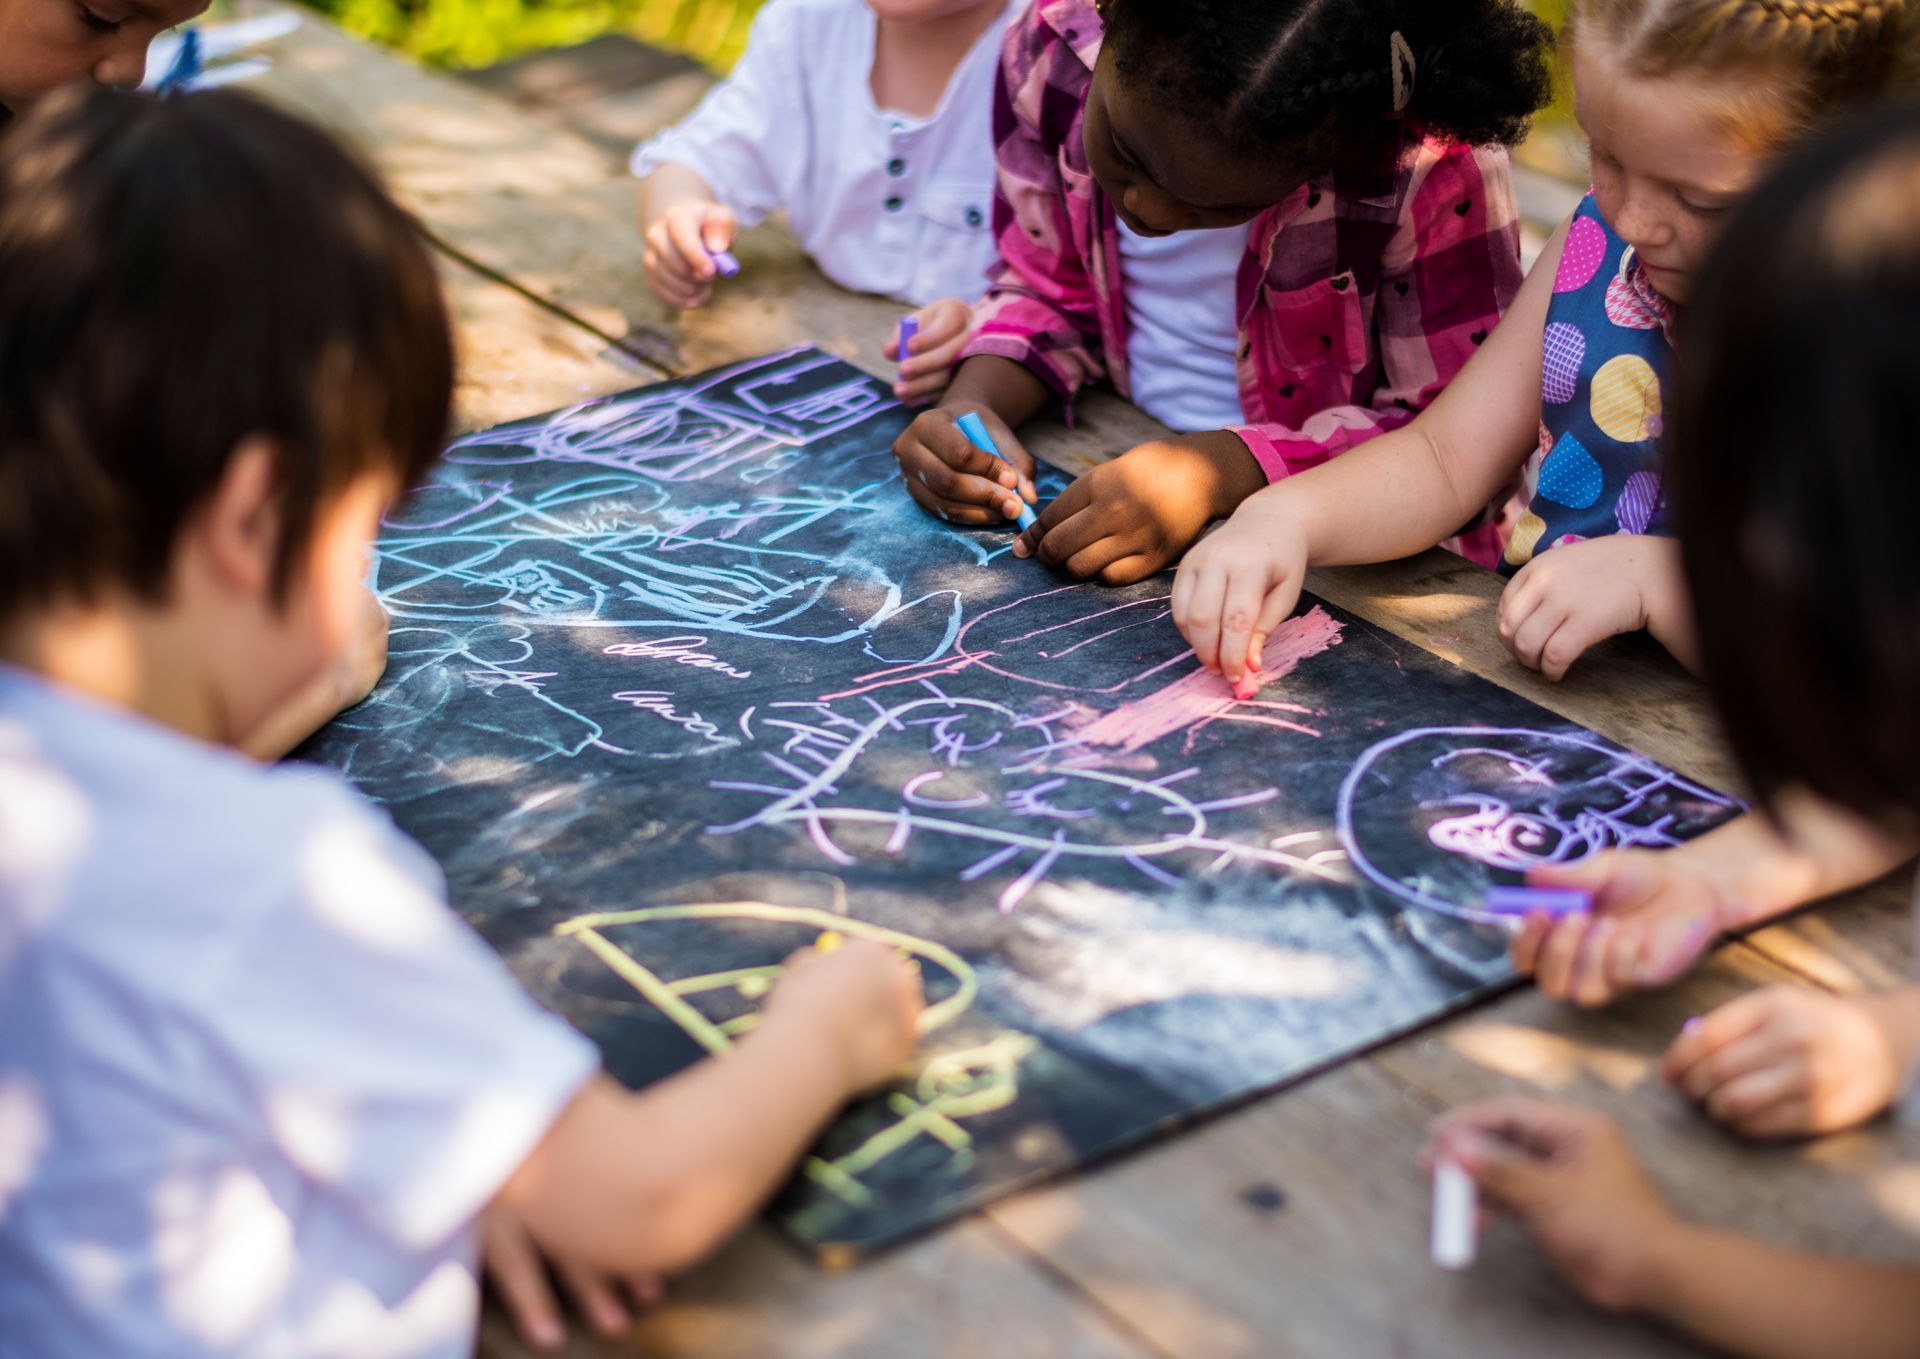 Children busily drawing with chalk